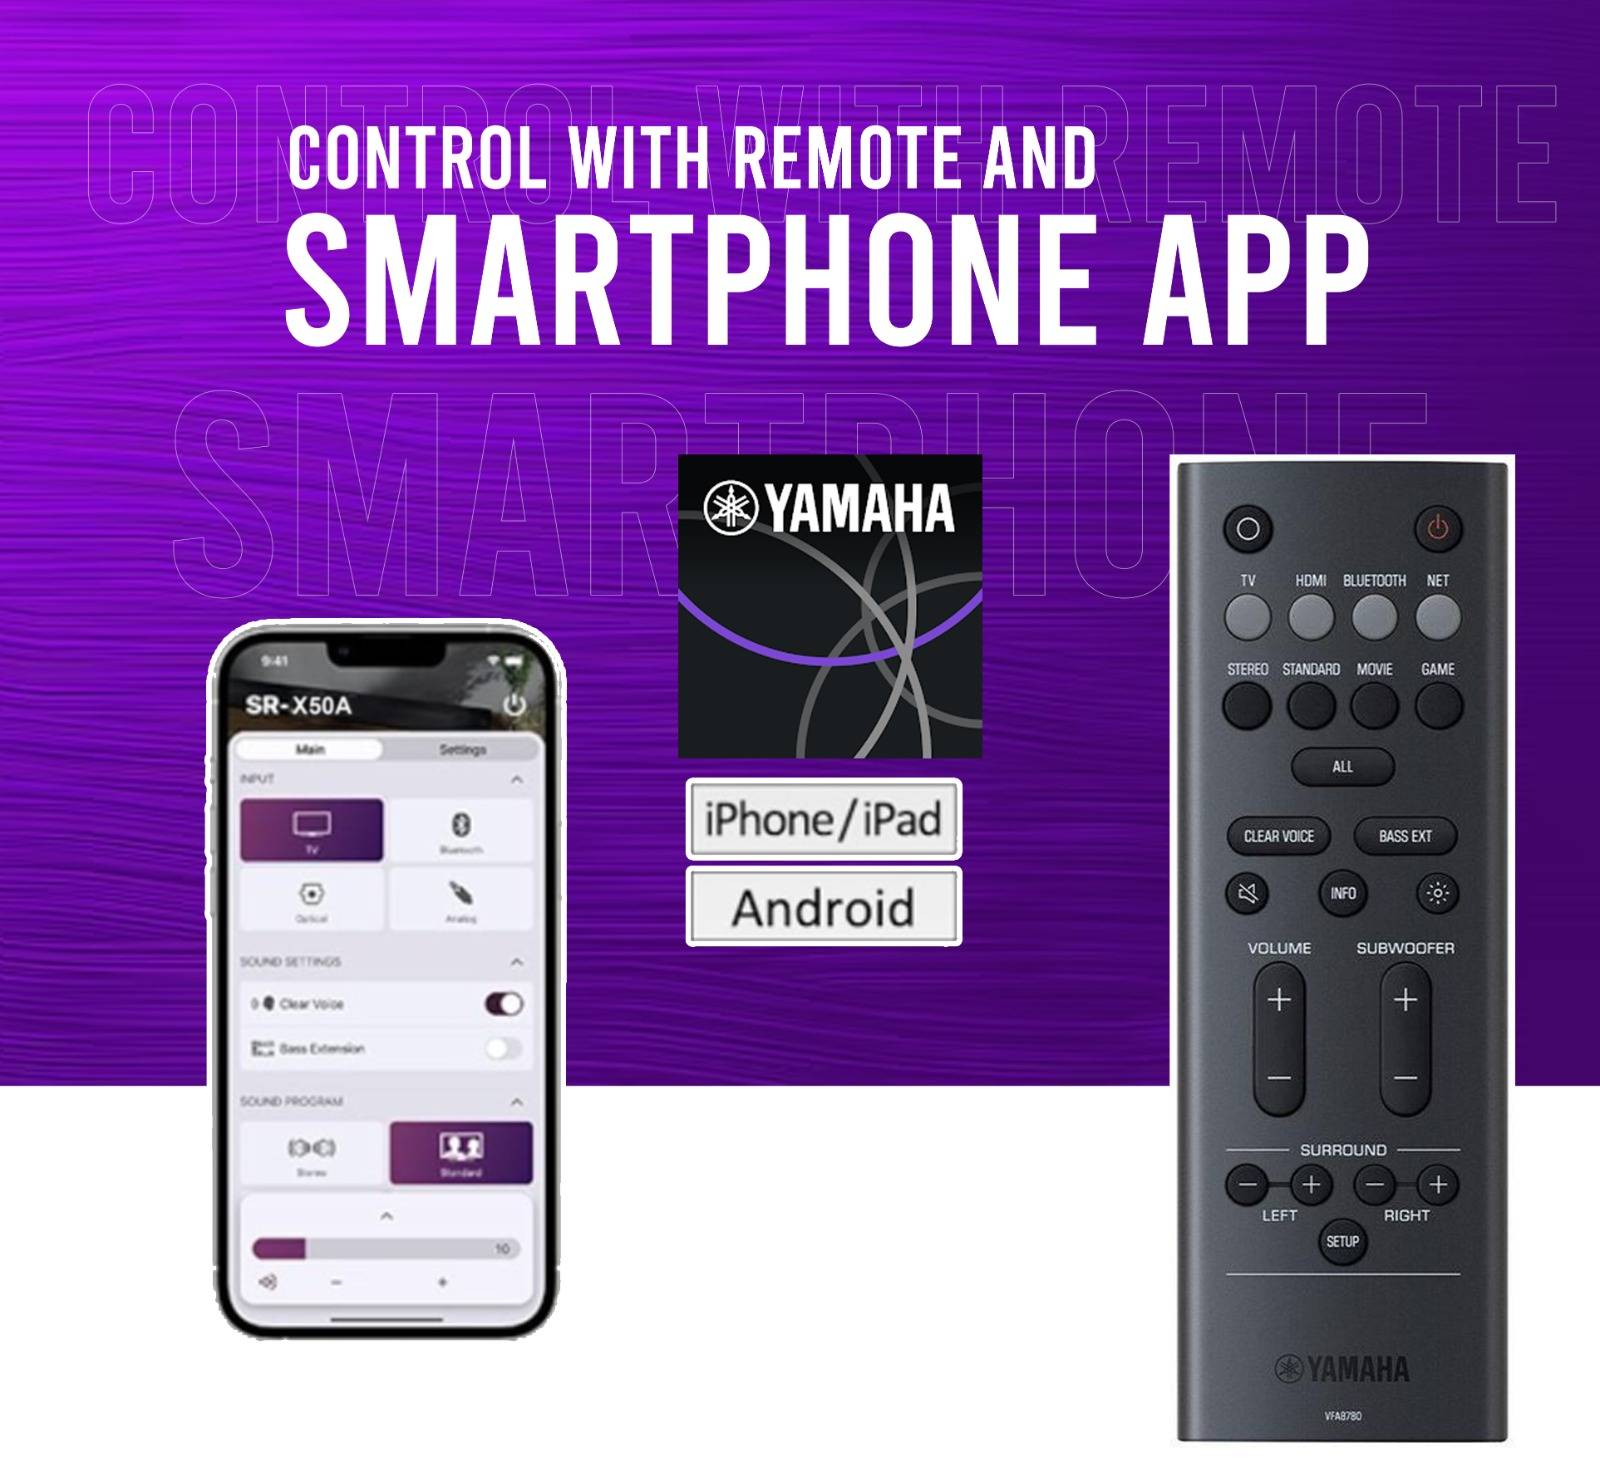 Control with Remote and Smartphone App